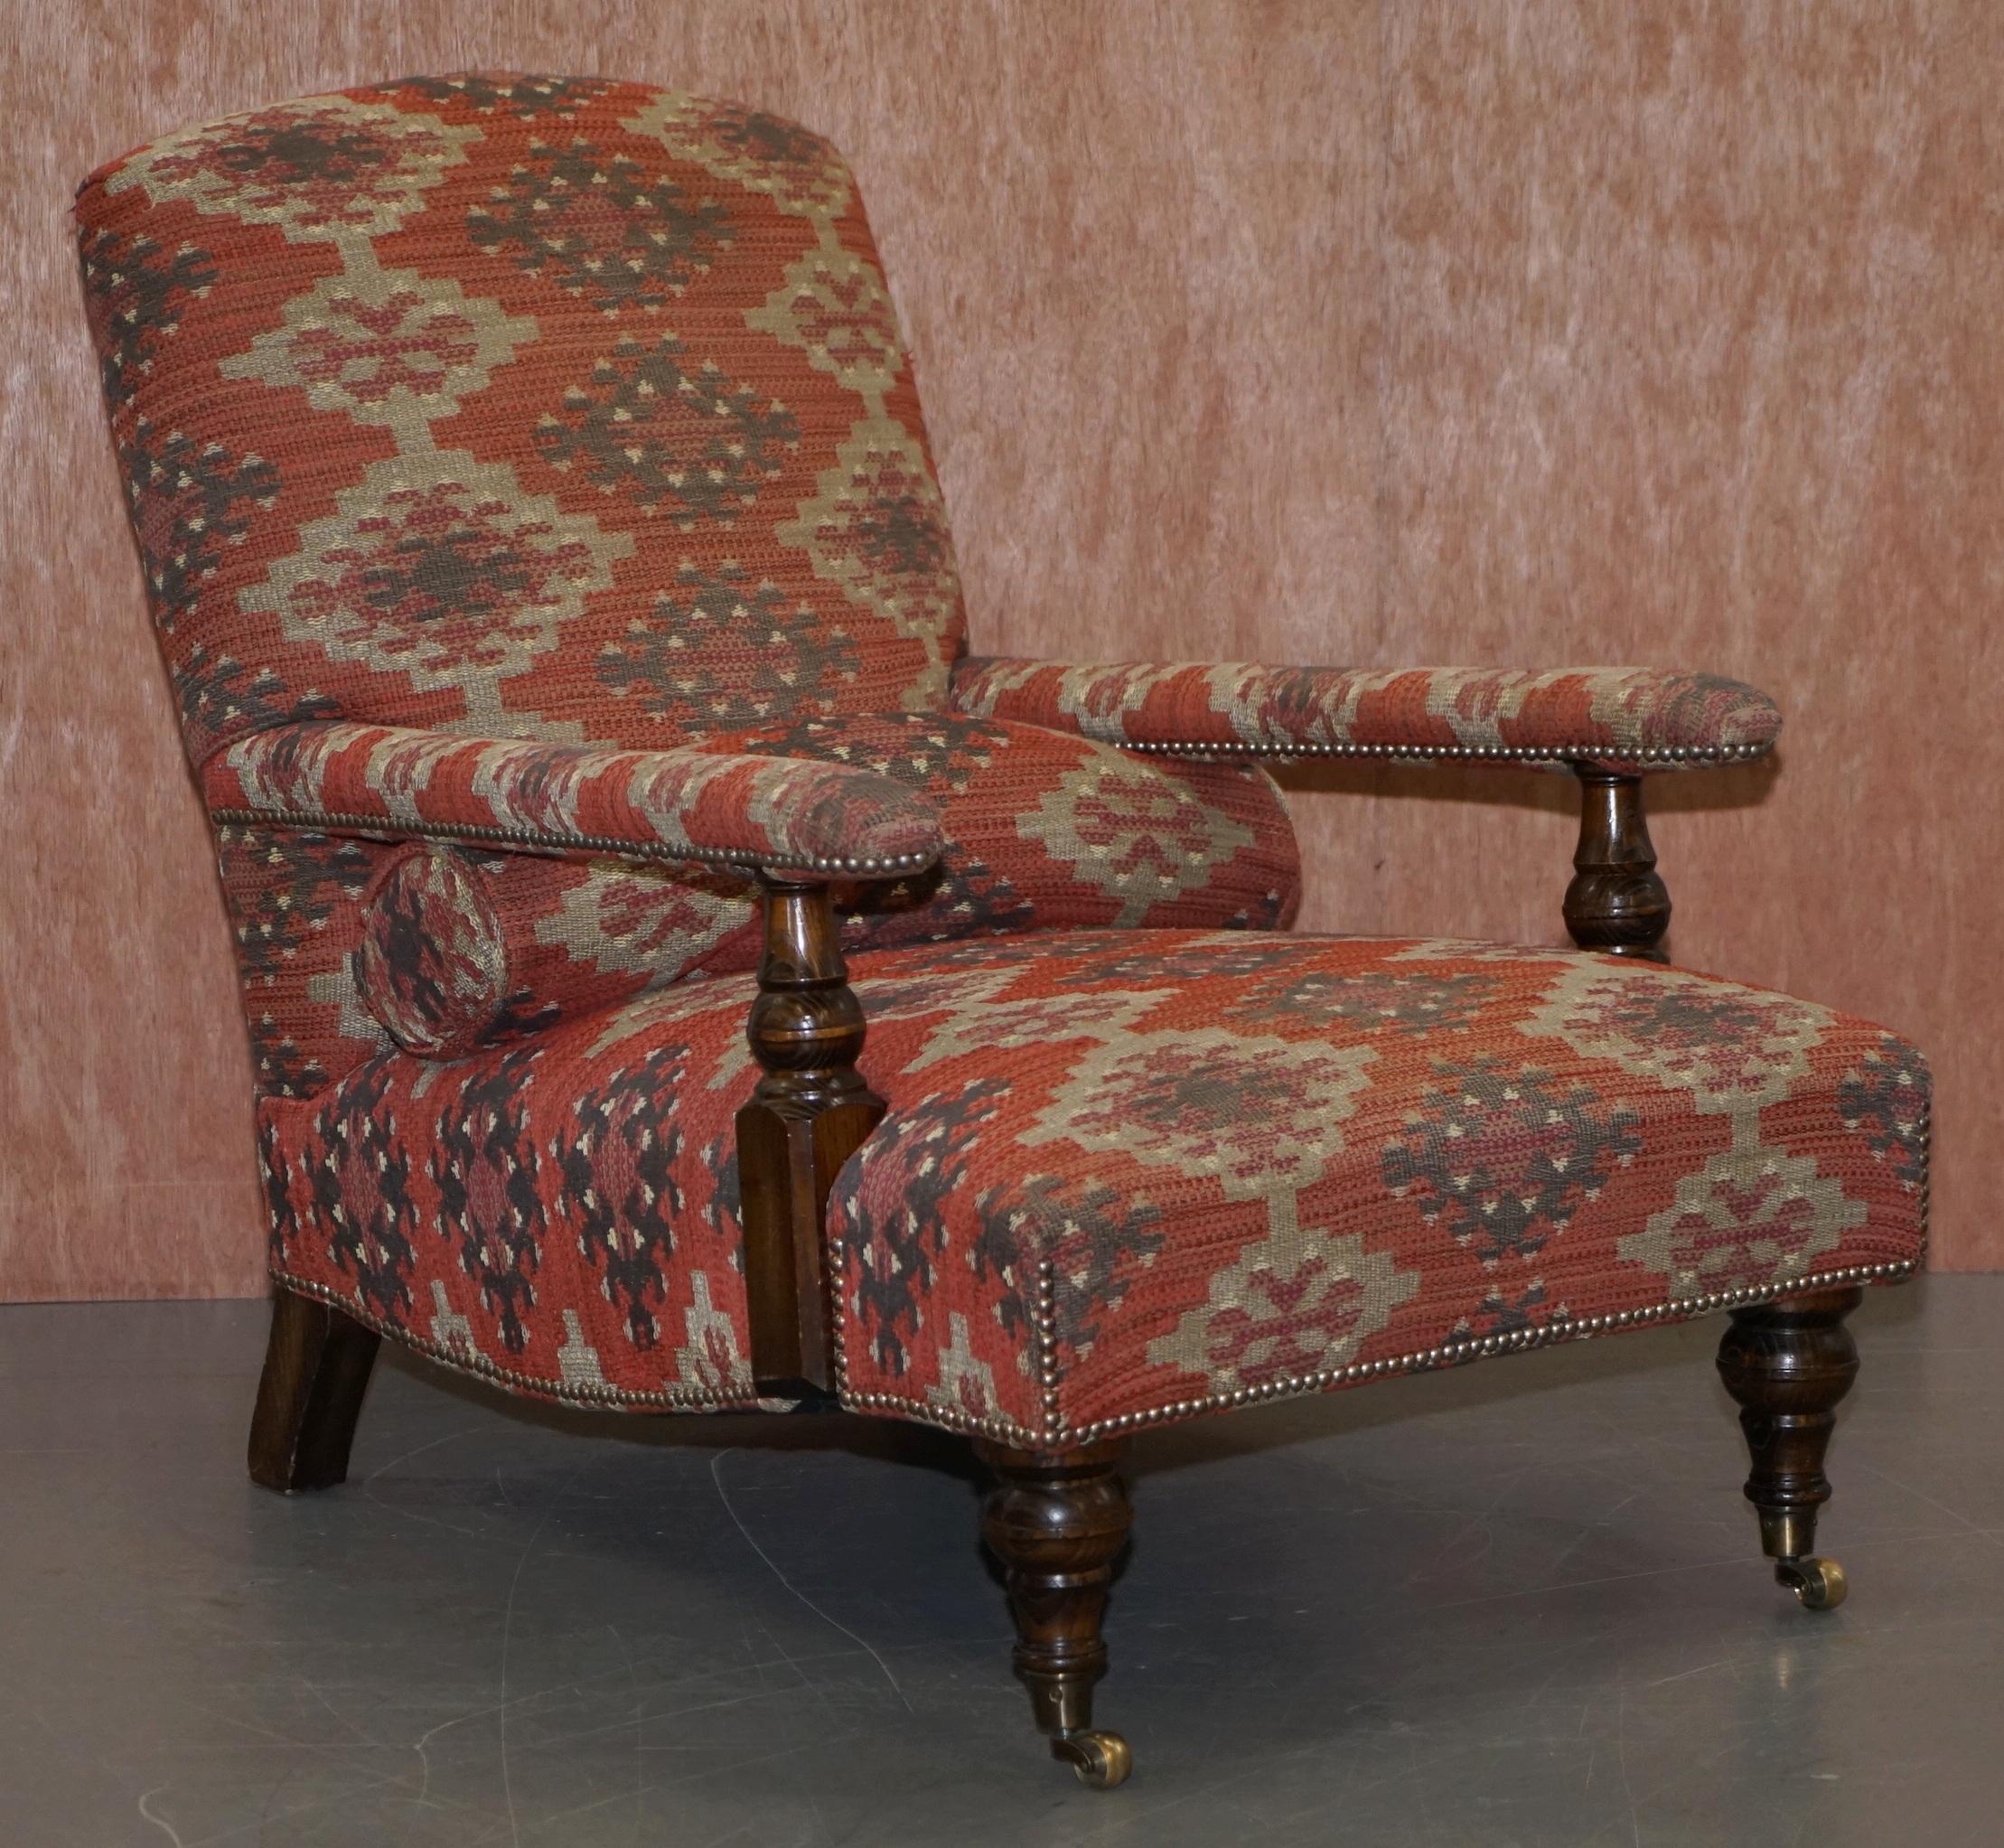 We are delighted to offer for sale this stunning pair of George Smith Edwardian Library reading armchairs with the original Kilim upholstery RRP £11,800

A stunning pair of chairs that retail (With the Kilim upholstery) for £5,900 each. Both